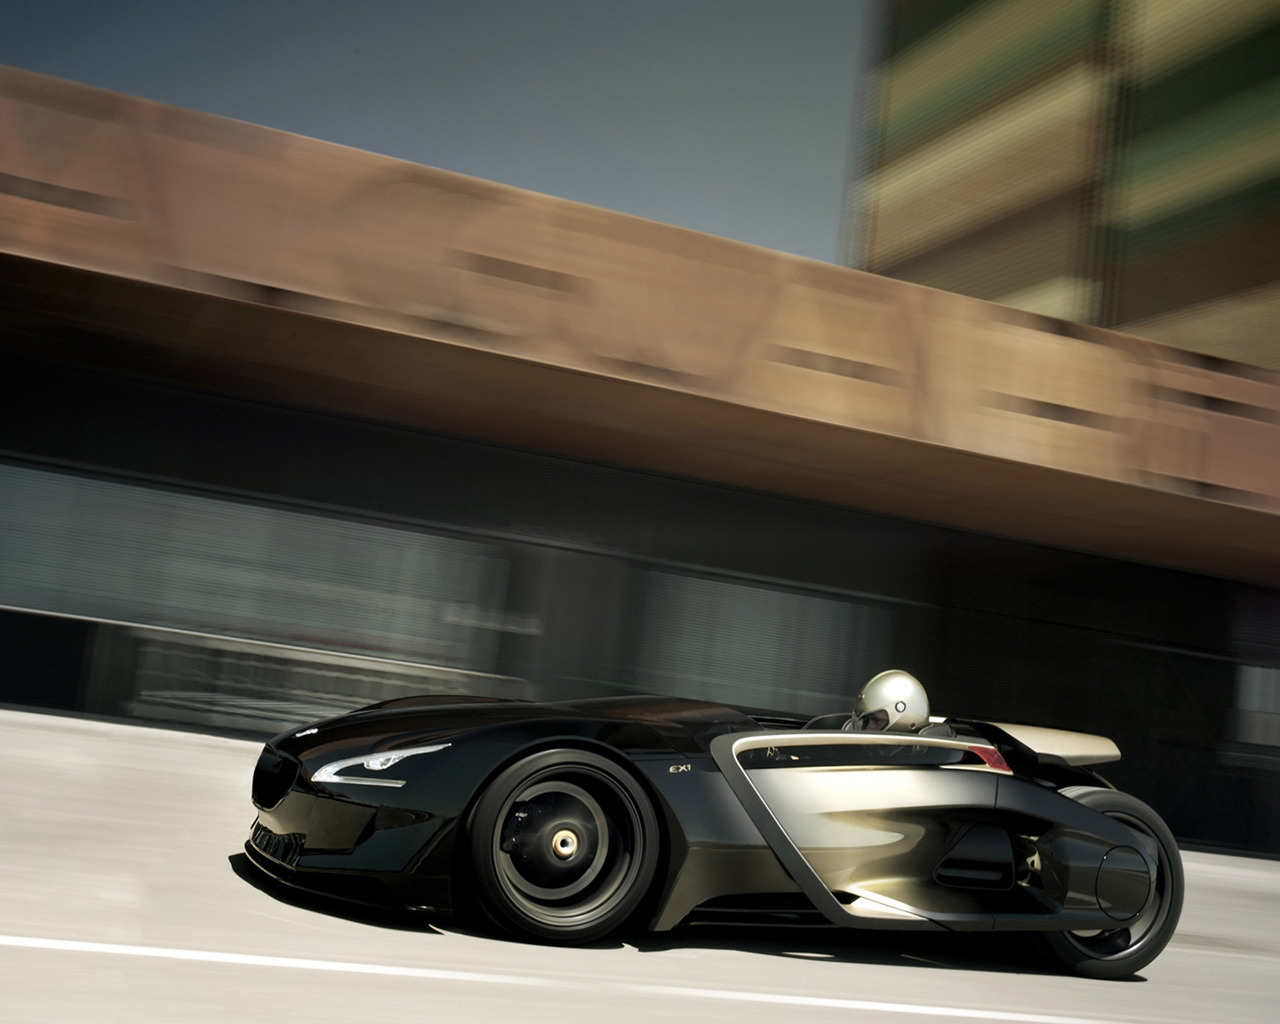 Peugeot EX1 Speed for 1280 x 1024 resolution